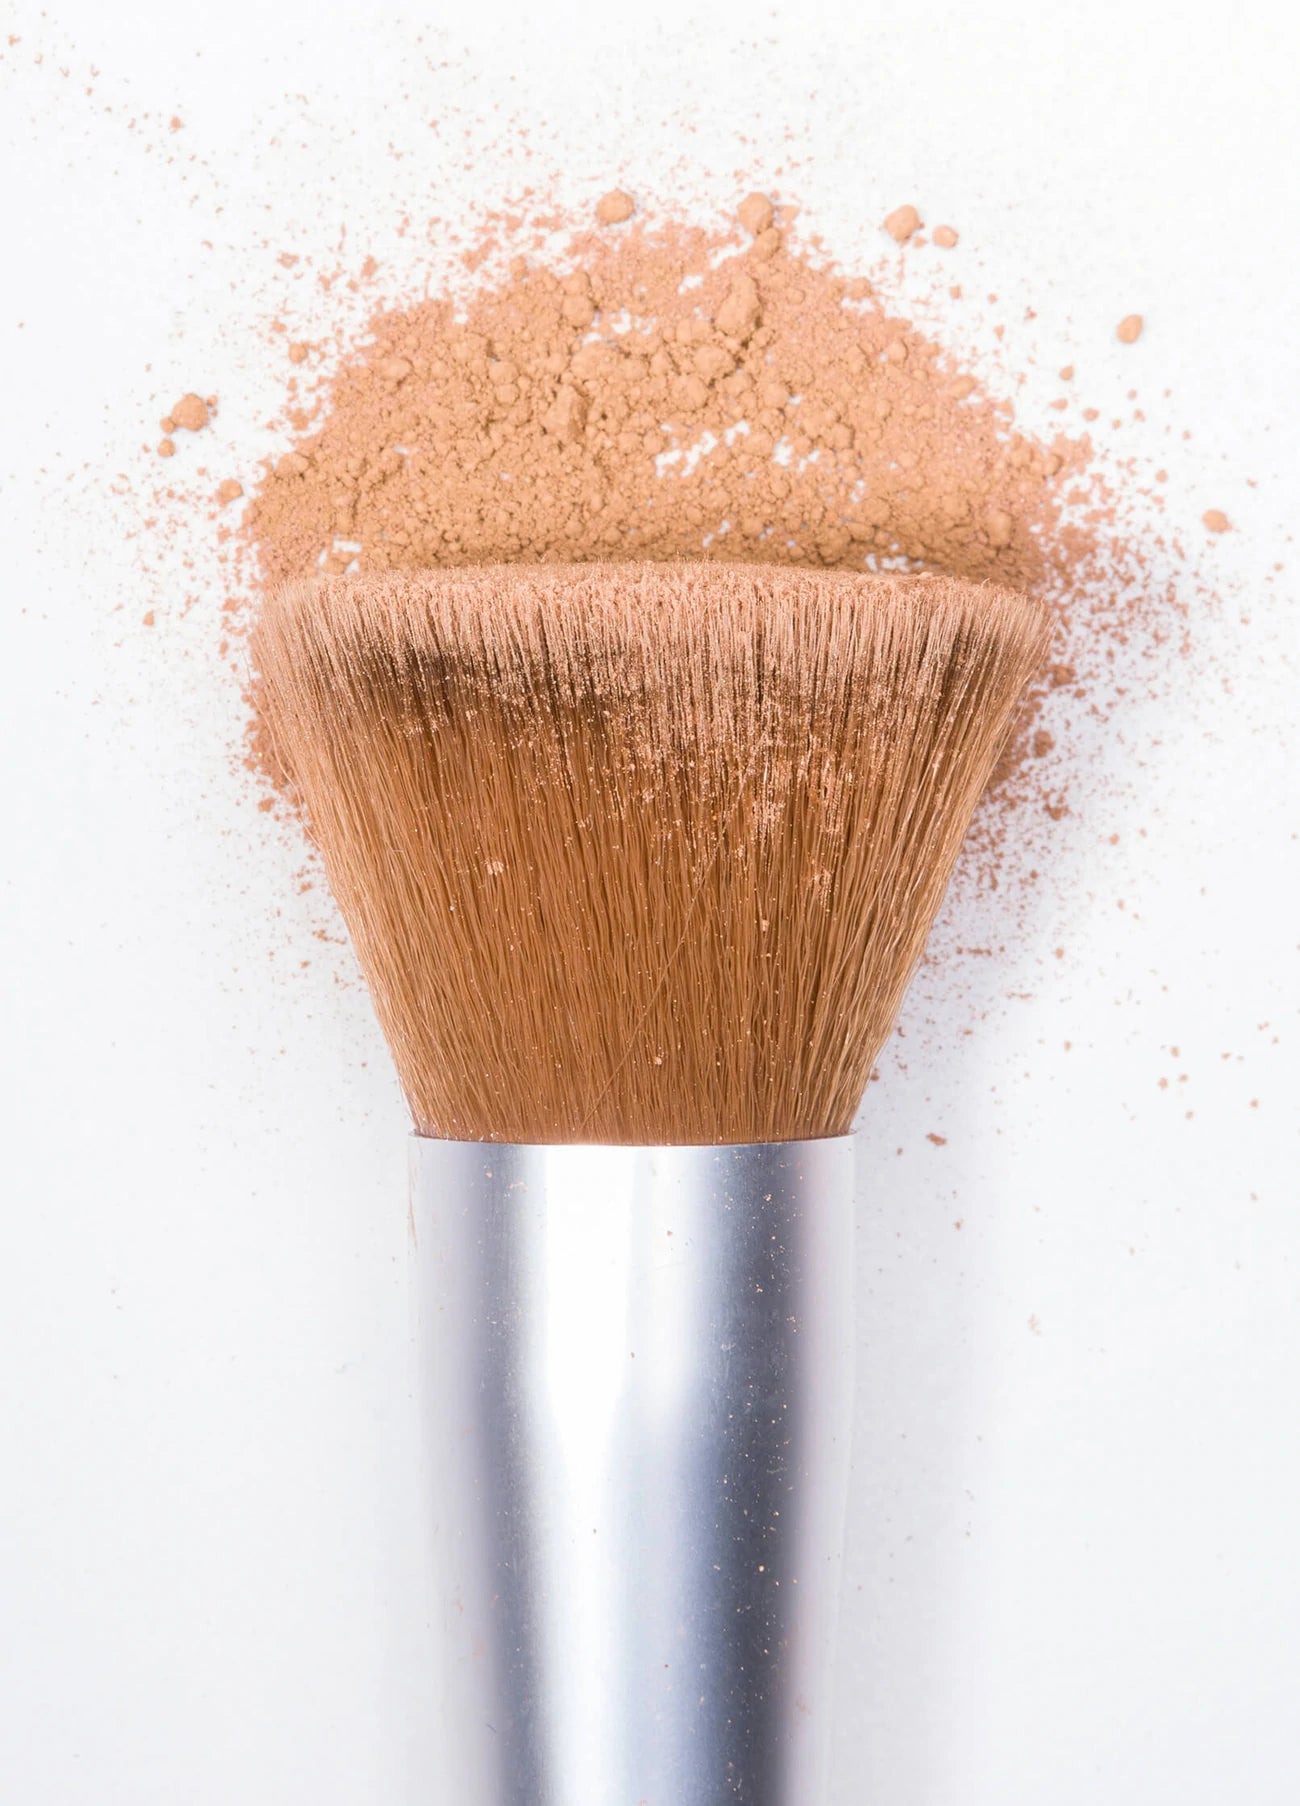 Multi Use Brush - Radiance Clean Beauty